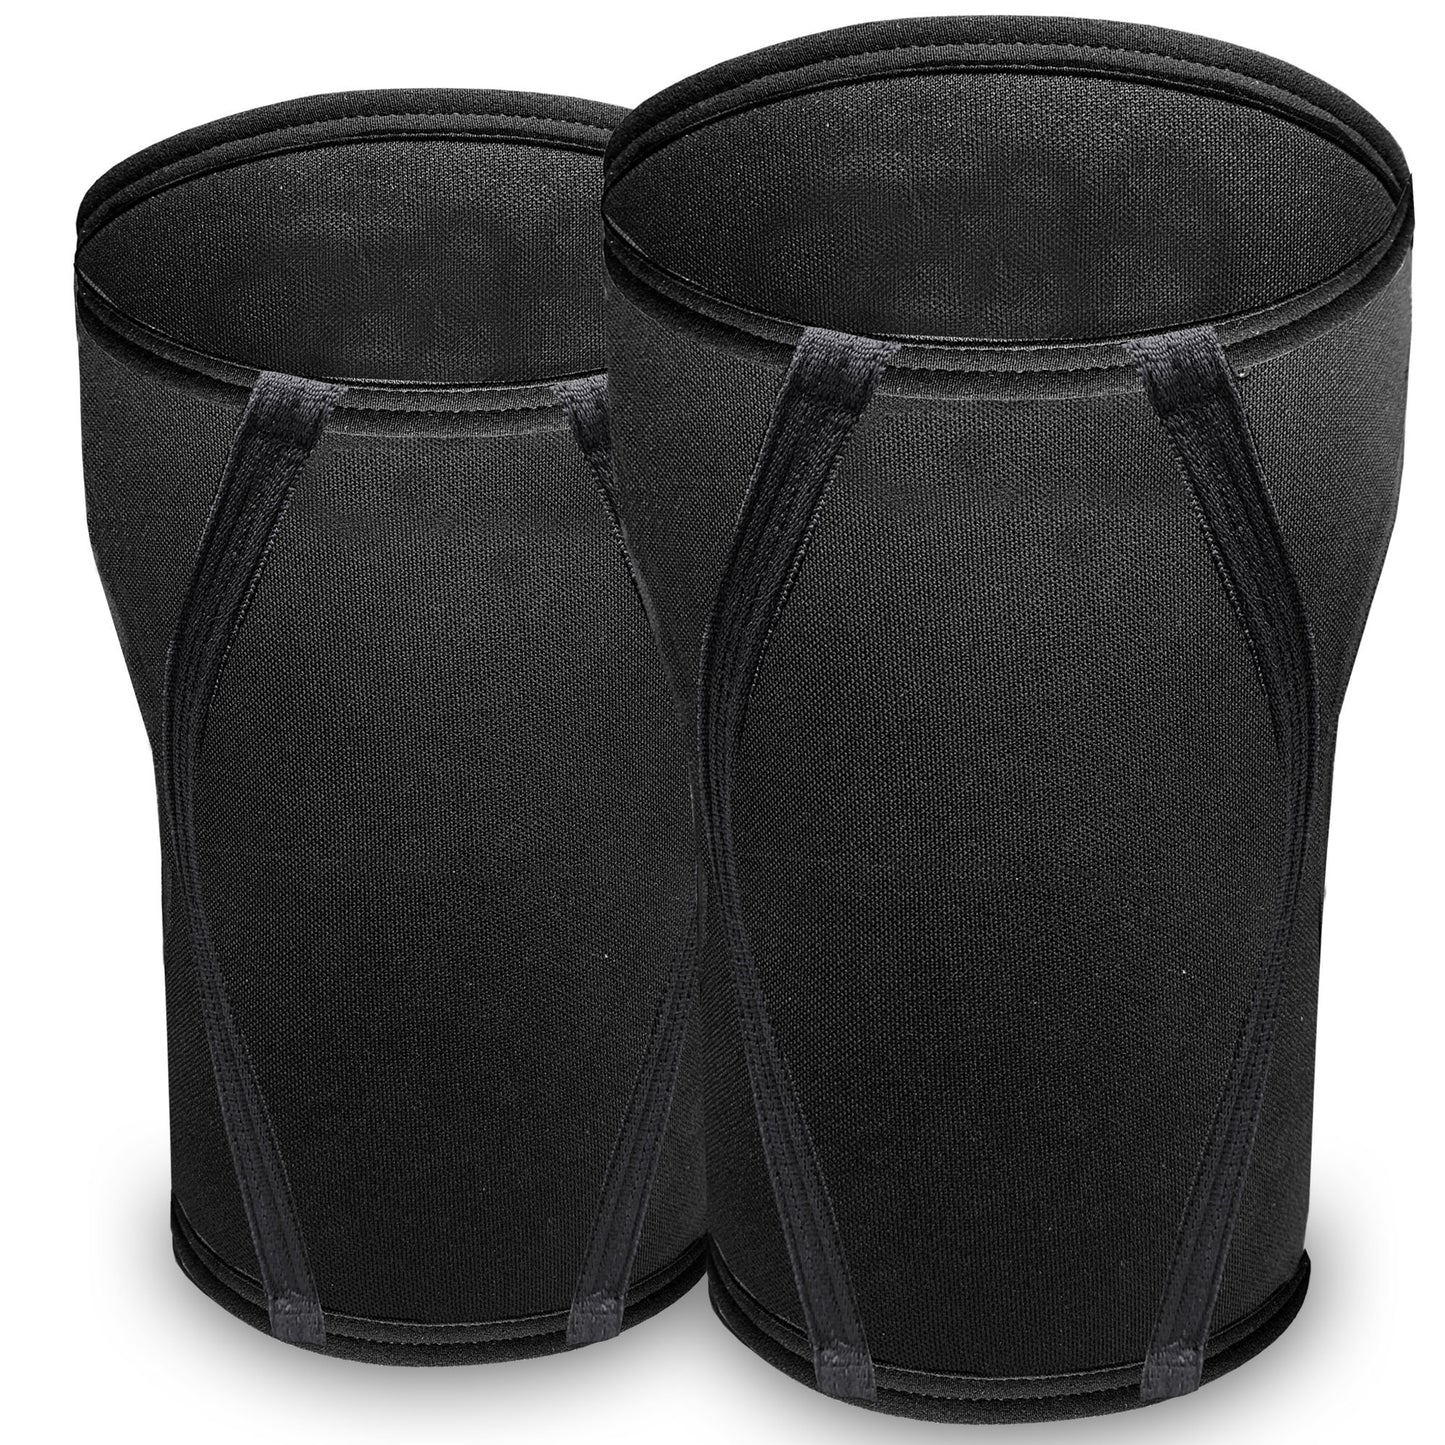 IBRO Premium 7MM Knee Sleeves (Pair) for Weightlifting & Powerlifting, Ultimate Compression Support & Injury Prevention - Squats, Deadlifts - for Men & Women, 1 Year Warranty, Black